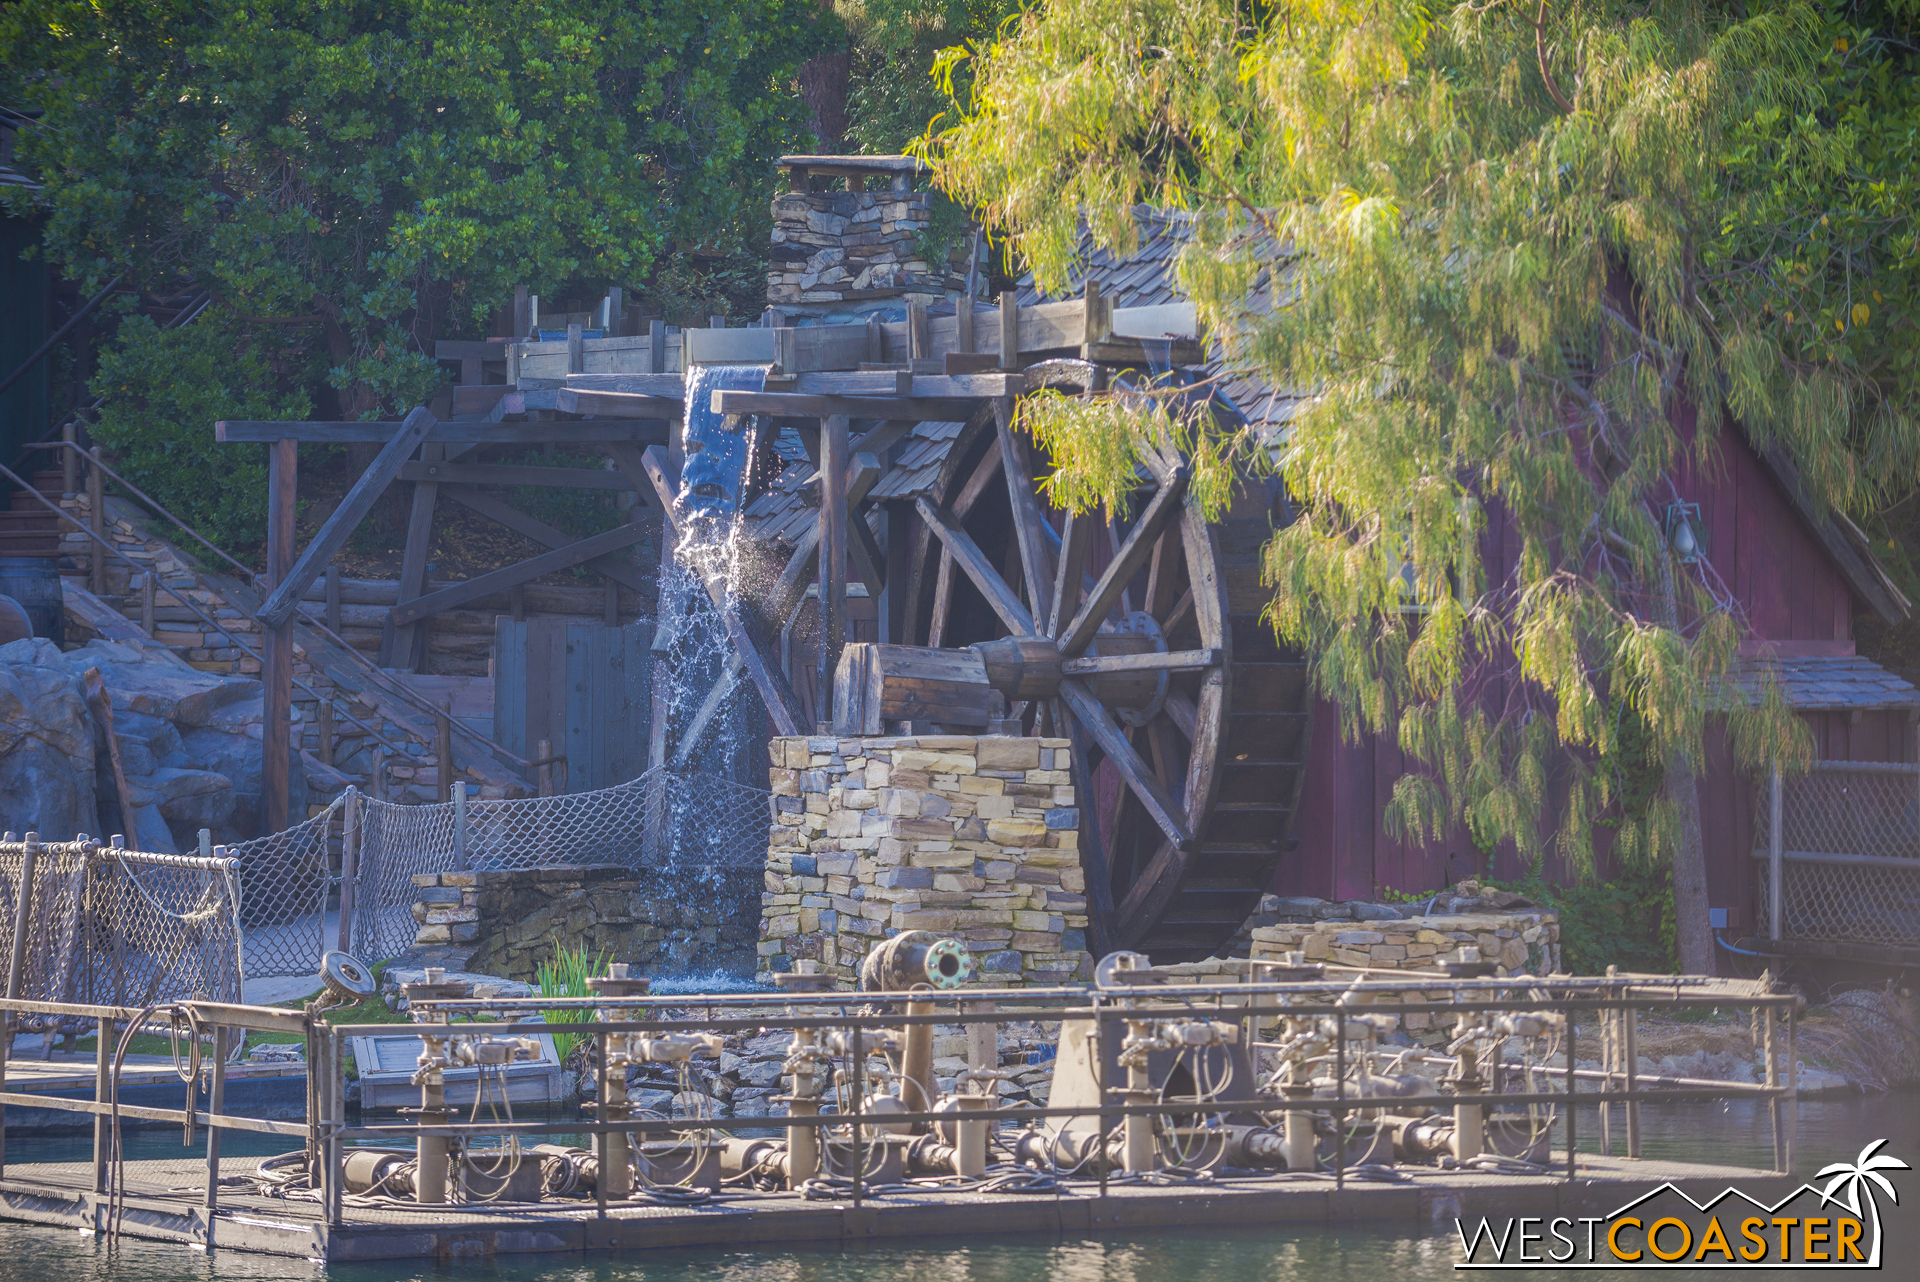  Little by little, exciting signs are coming online to mark the impending completion of the Rivers of America redo. 